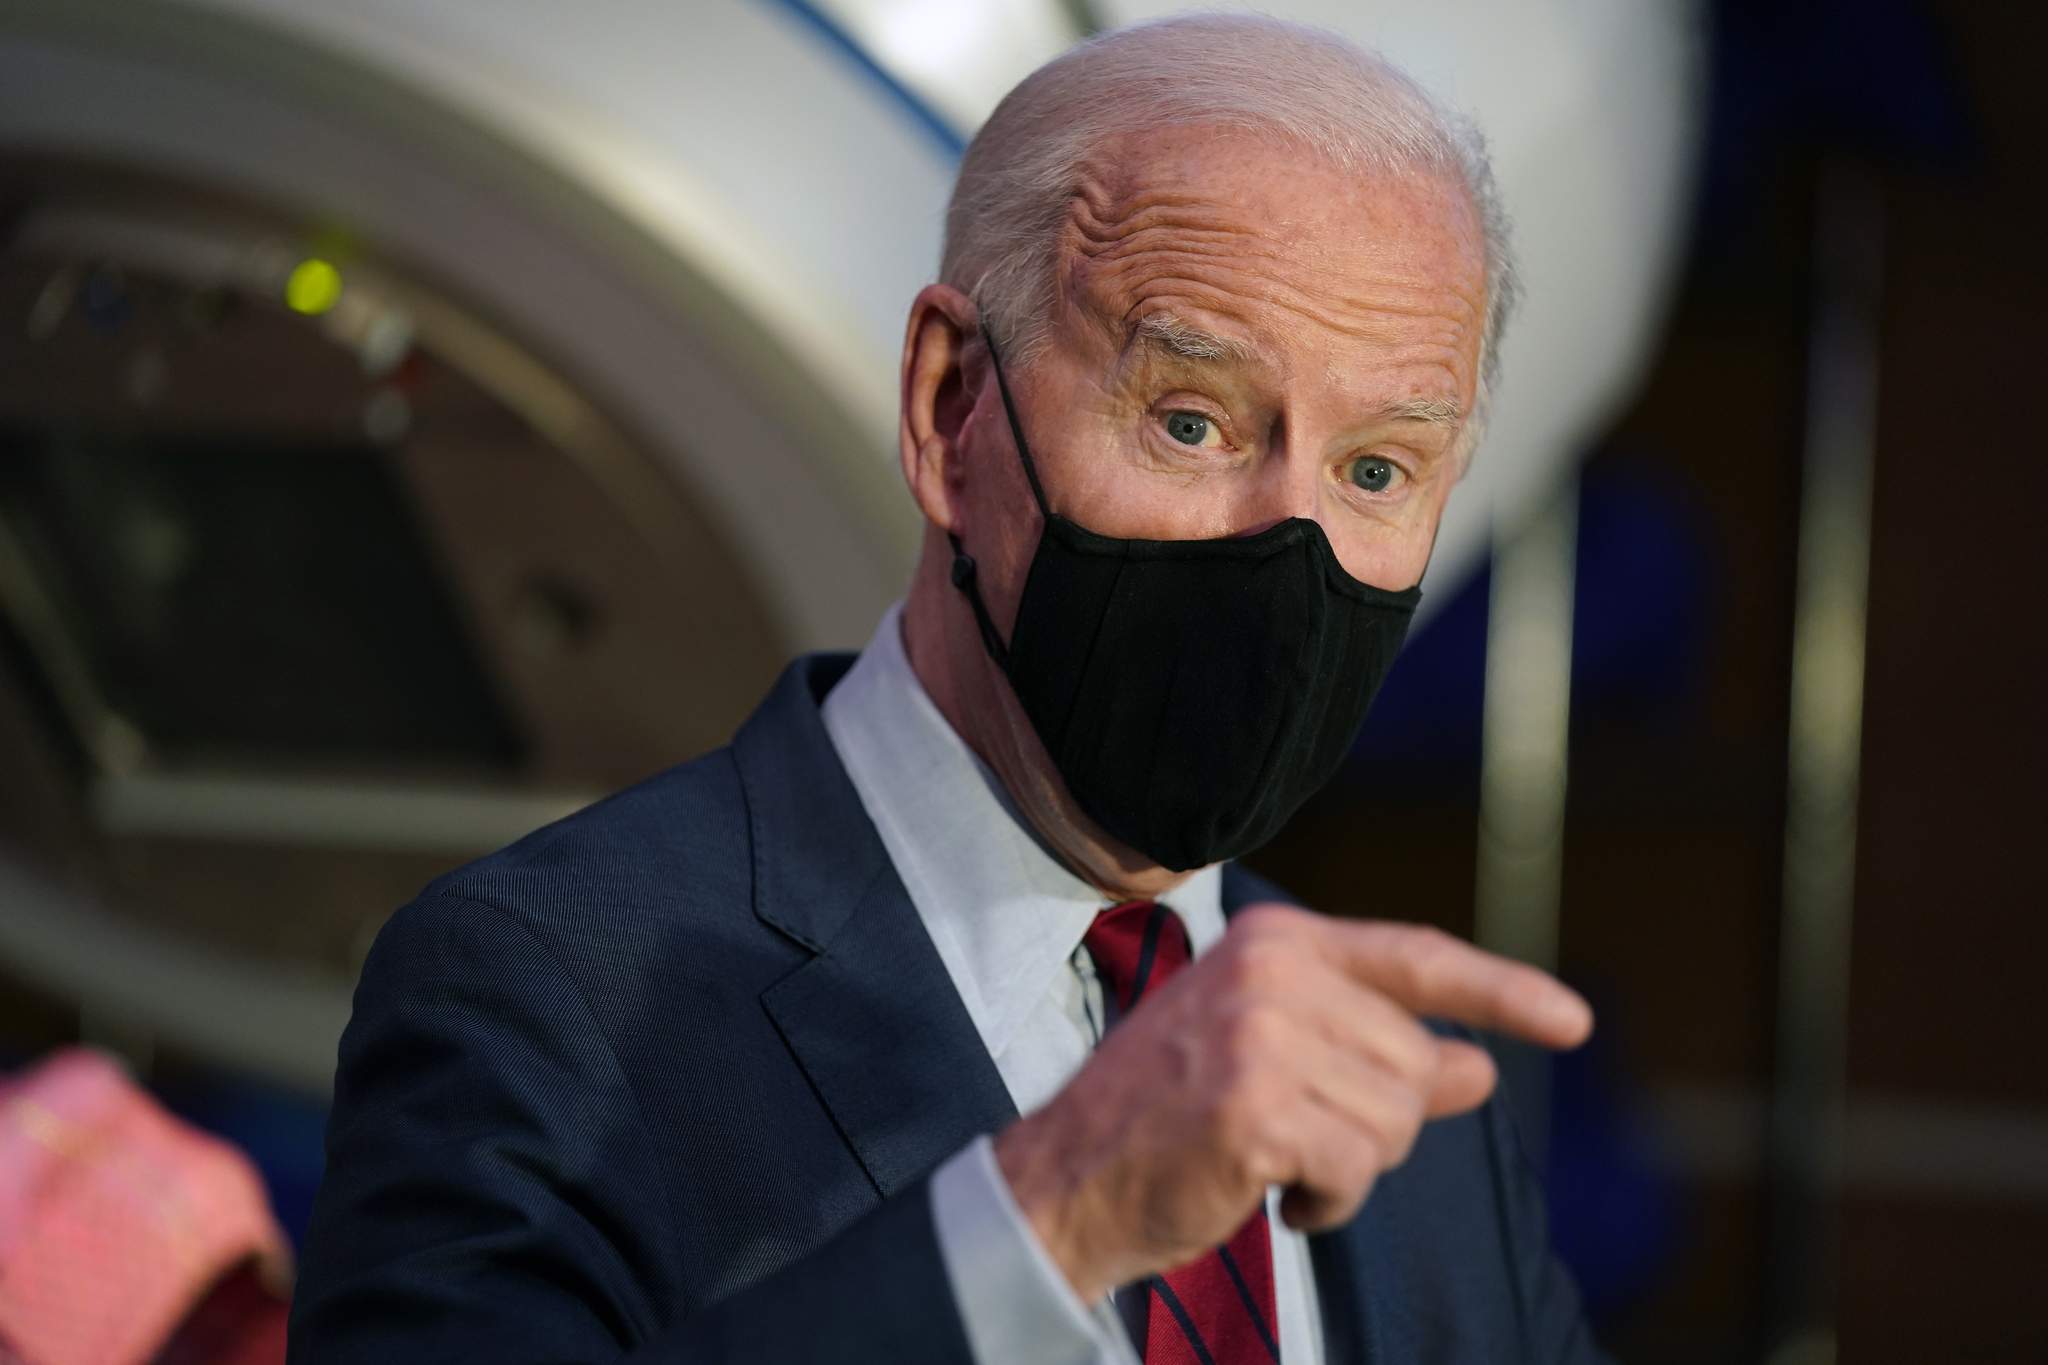 Biden expands 'Obamacare' by cutting health insurance costs